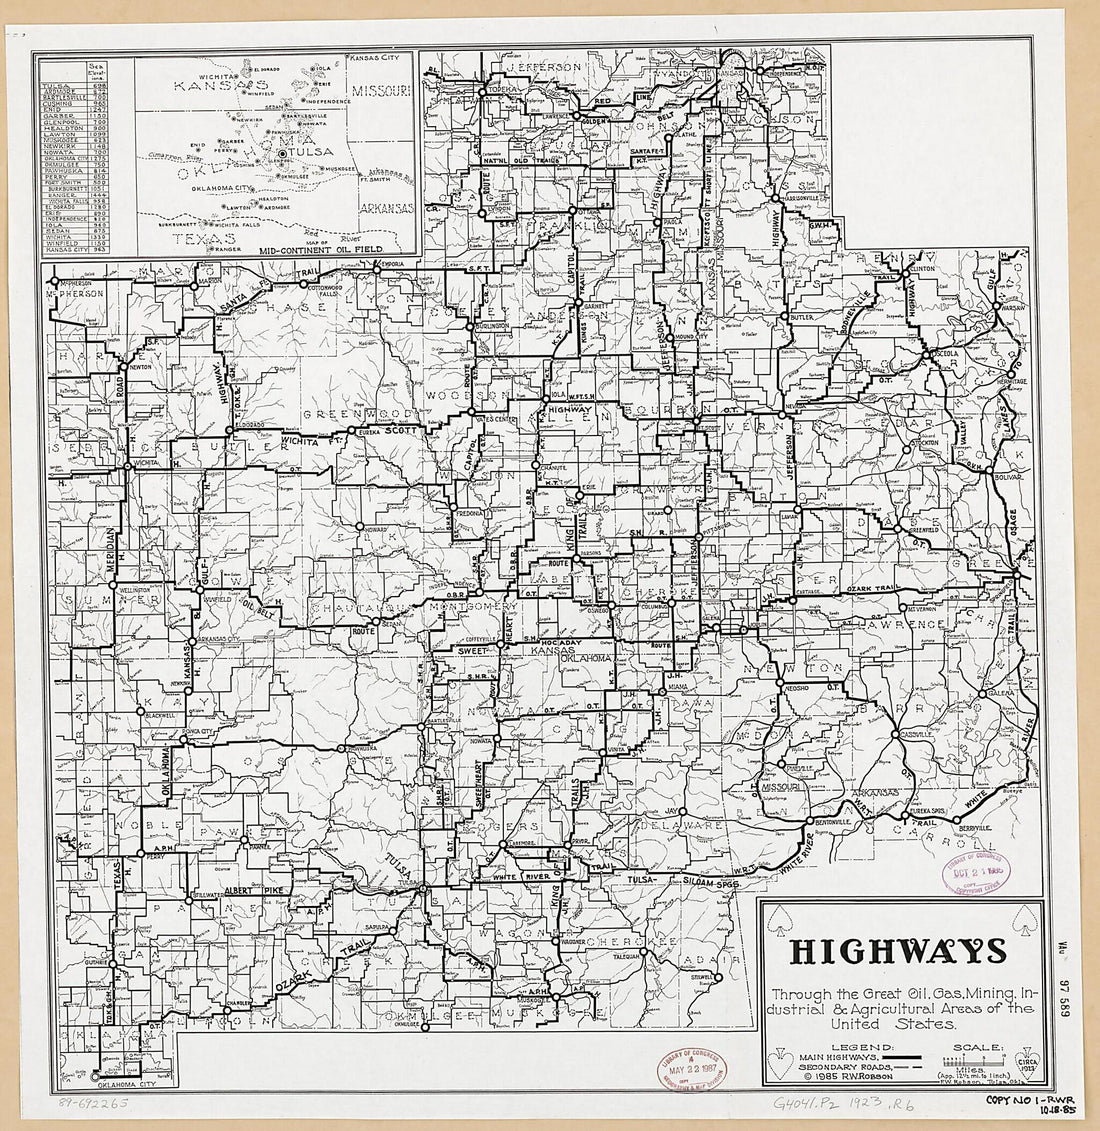 This old map of Highways Through the Great Oil, Gas, Mining, Industrial &amp; Agricultural Areas of the United States from 1923 was created by F. W. (Floyd William) Robson in 1923